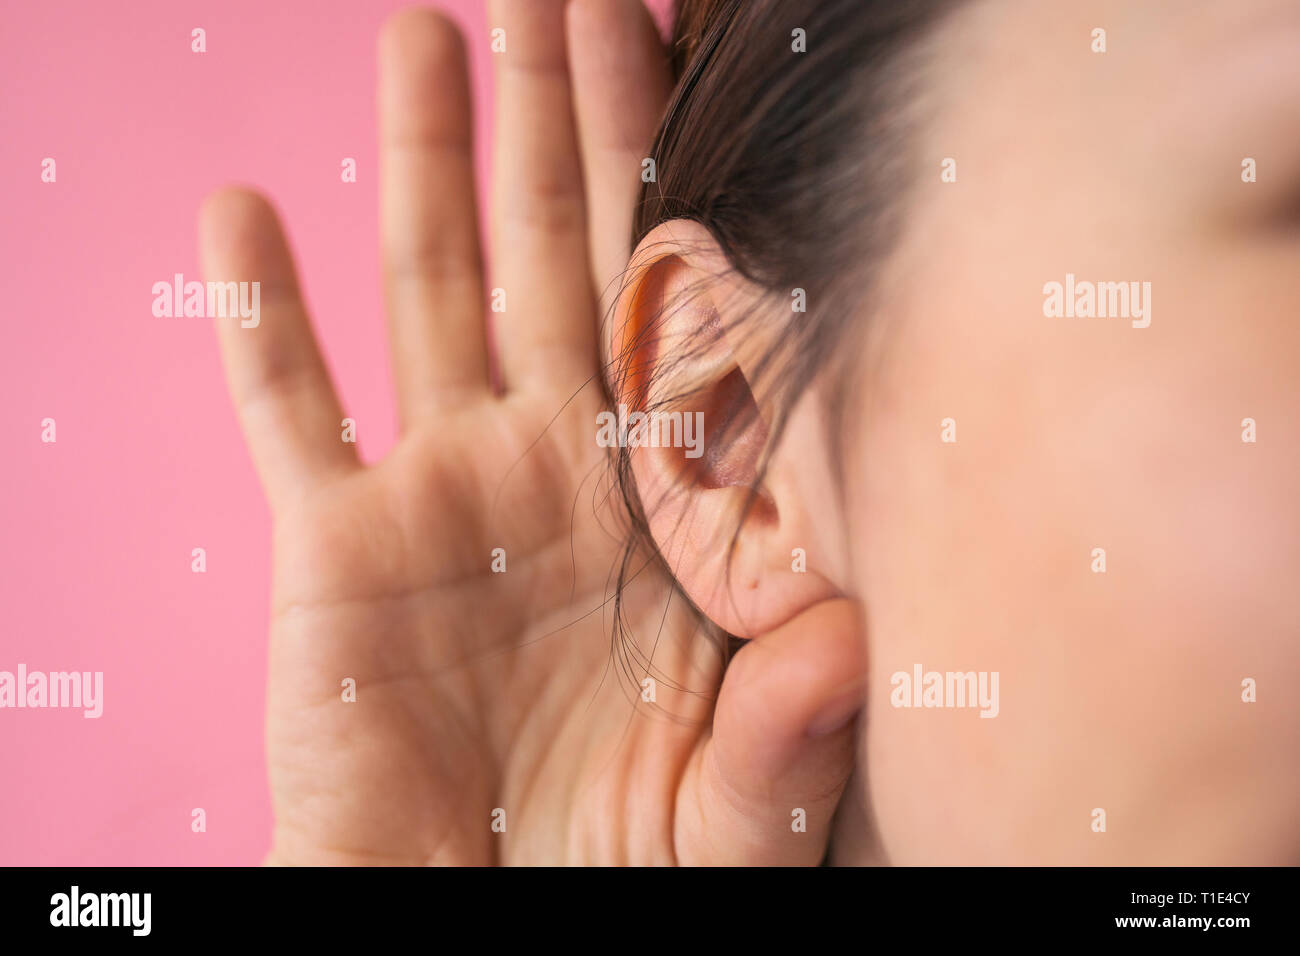 Close-up of a girl holding her hand next to her ear. The concept of chatter, gossip, news or secrets. Stock Photo